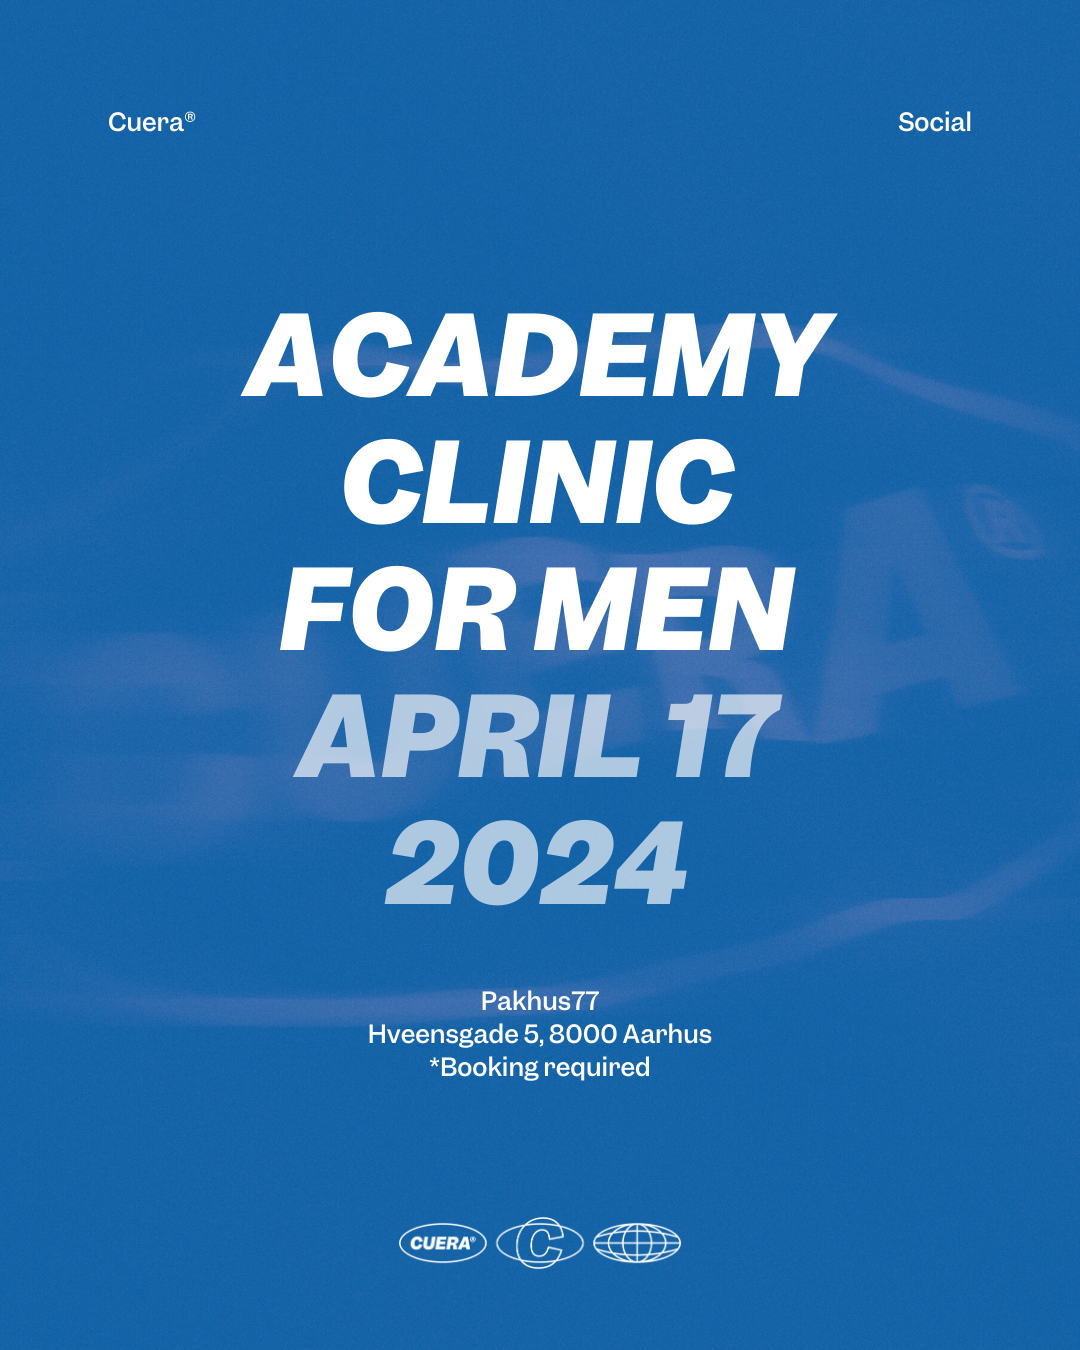 Academy Clinic for Men - 17 April